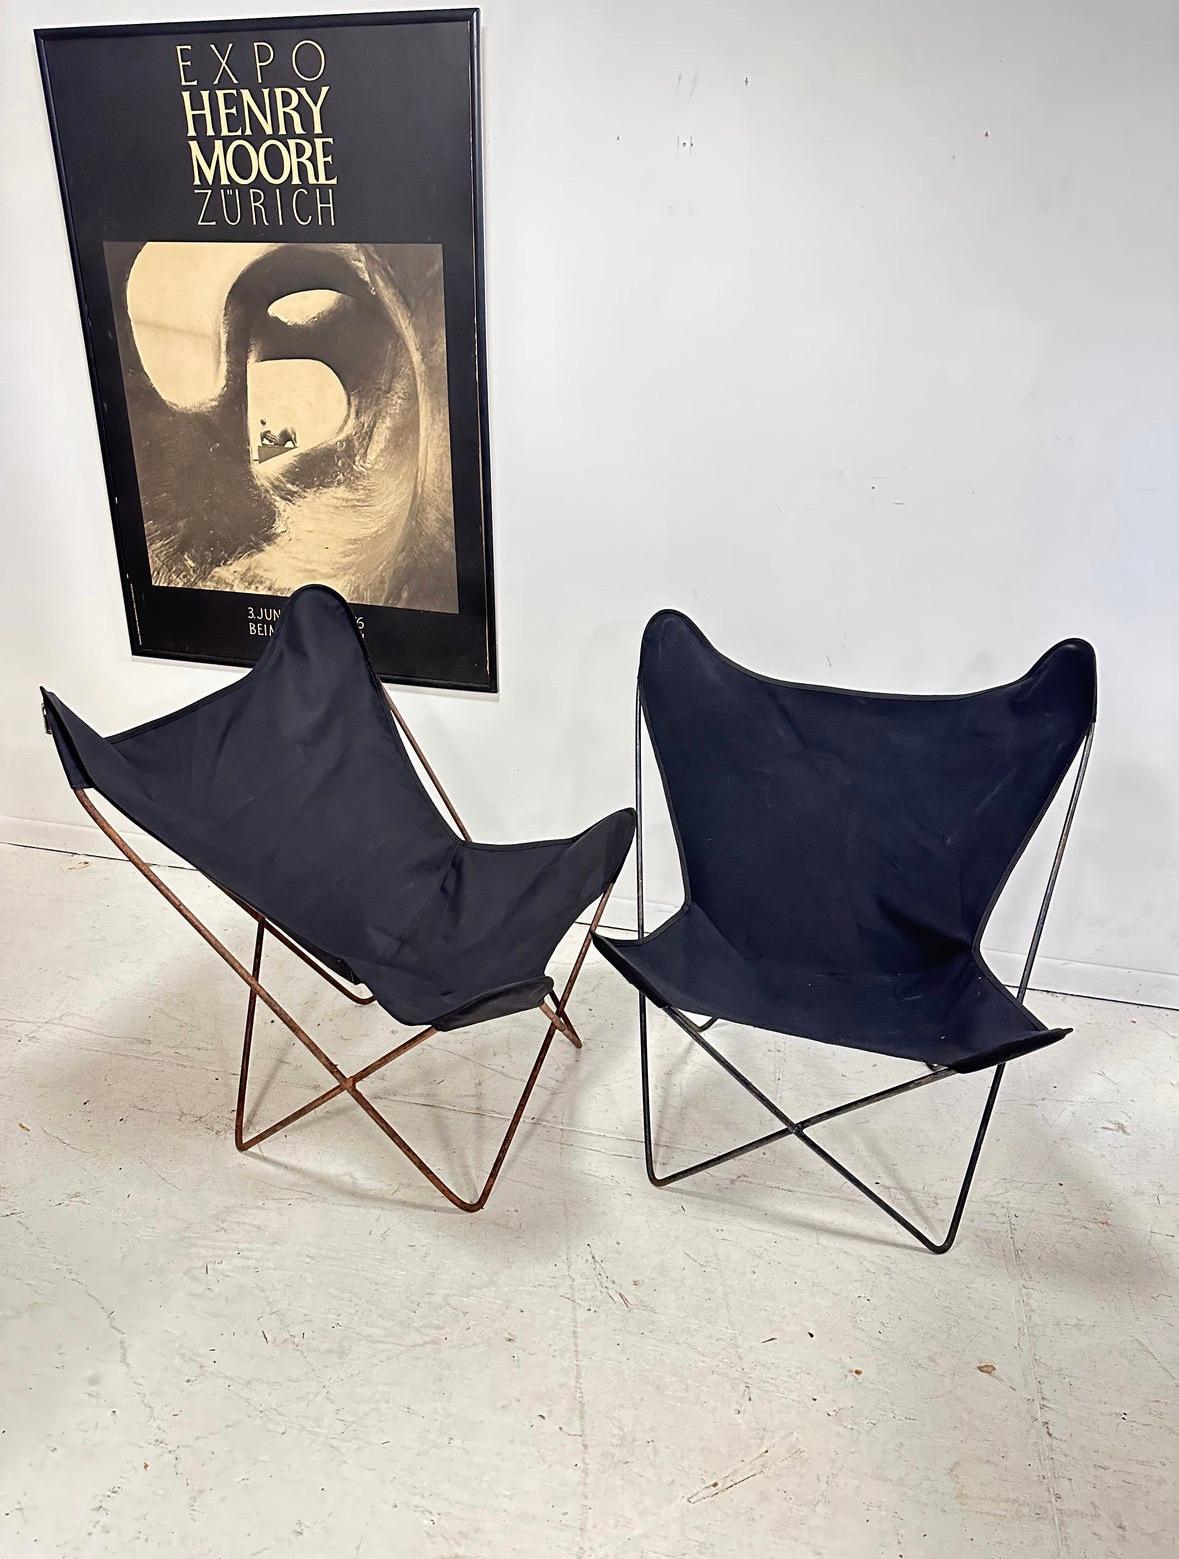 1960s Bkf Hardoy Butterfly Chairs for Knoll in Black In Good Condition For Sale In Farmingdale, NJ